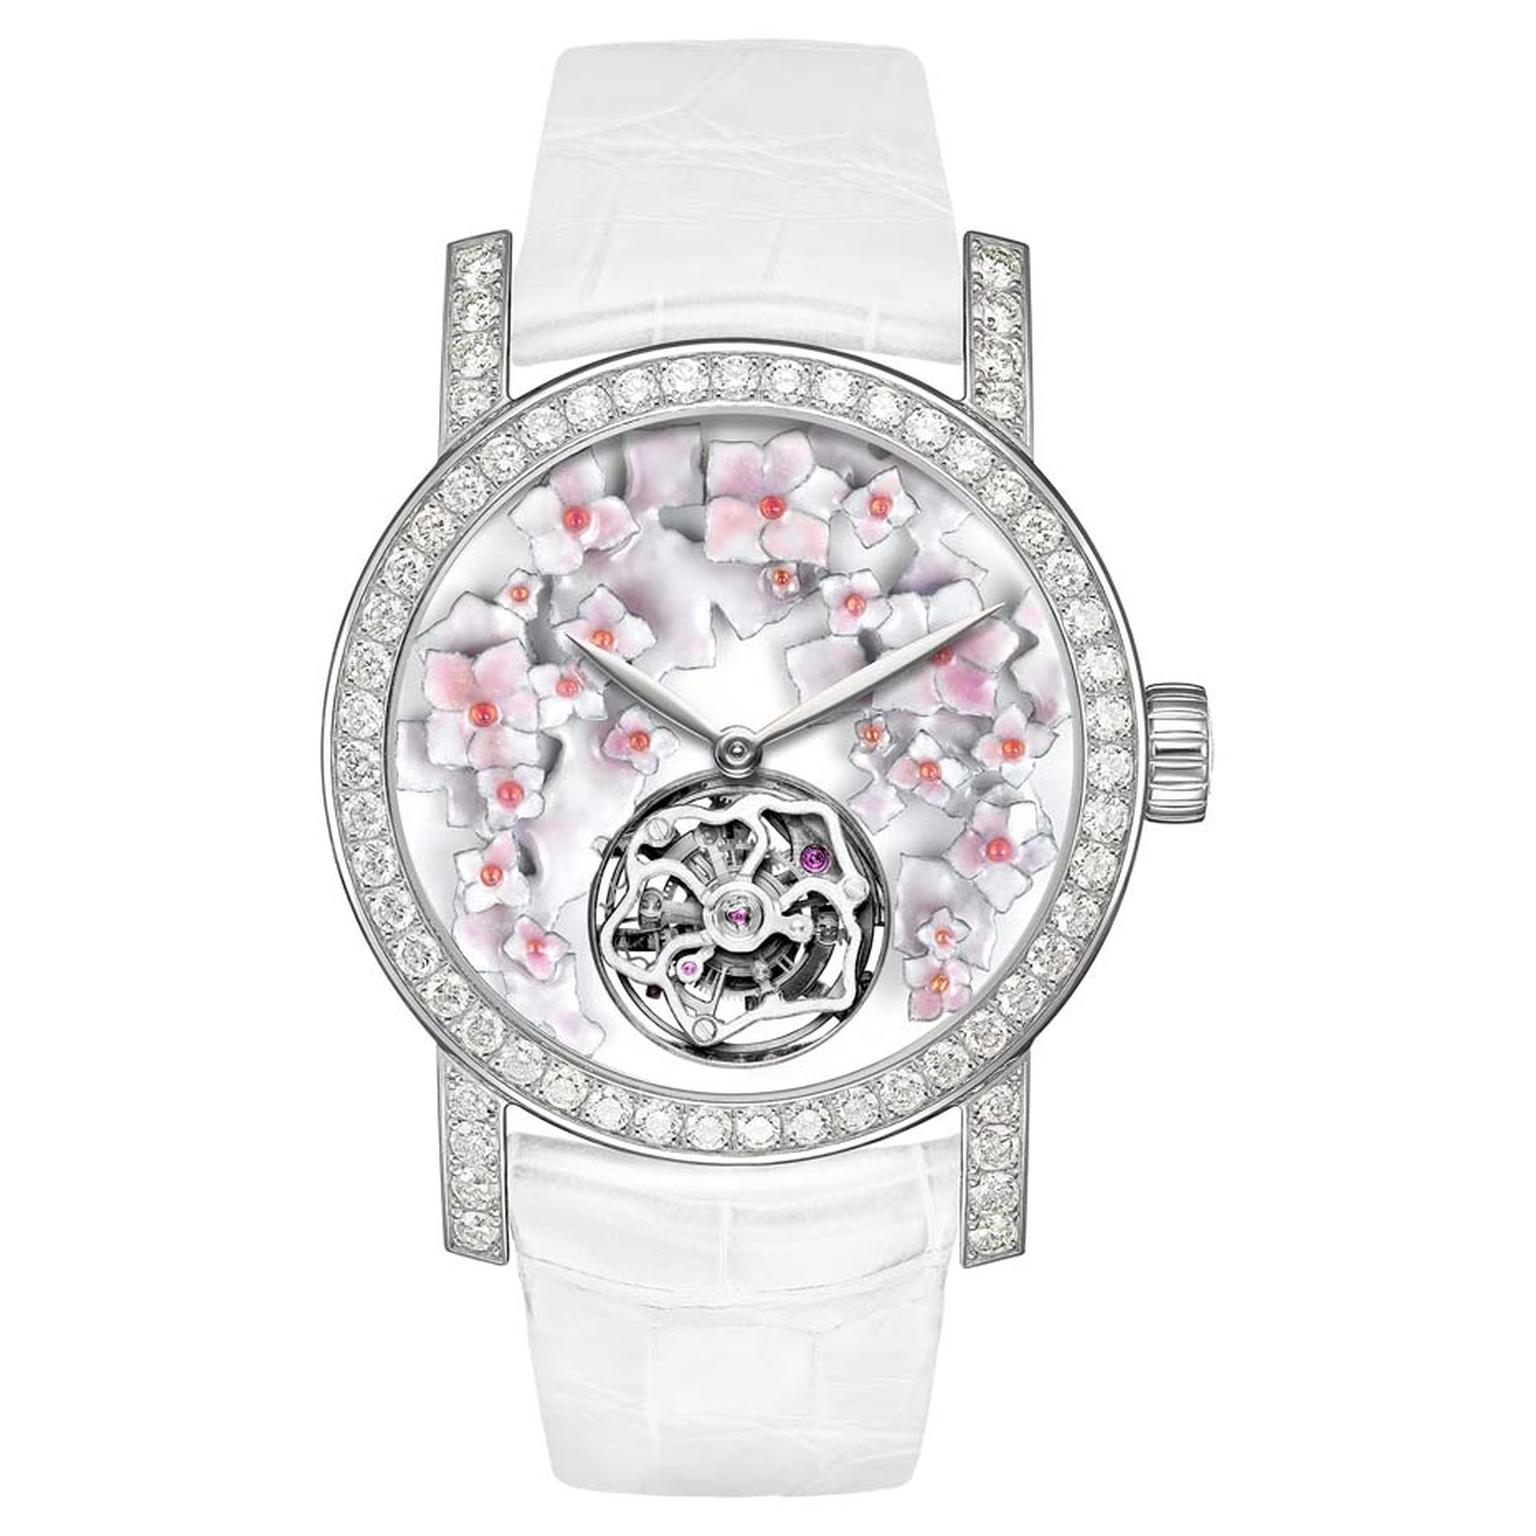 Chaumet's Hortensia Tourbillon watch features a round dial with a grand feu enamel background and hand-sculpted and engraved flowers, illuminated by diamonds on the bezel and lugs.